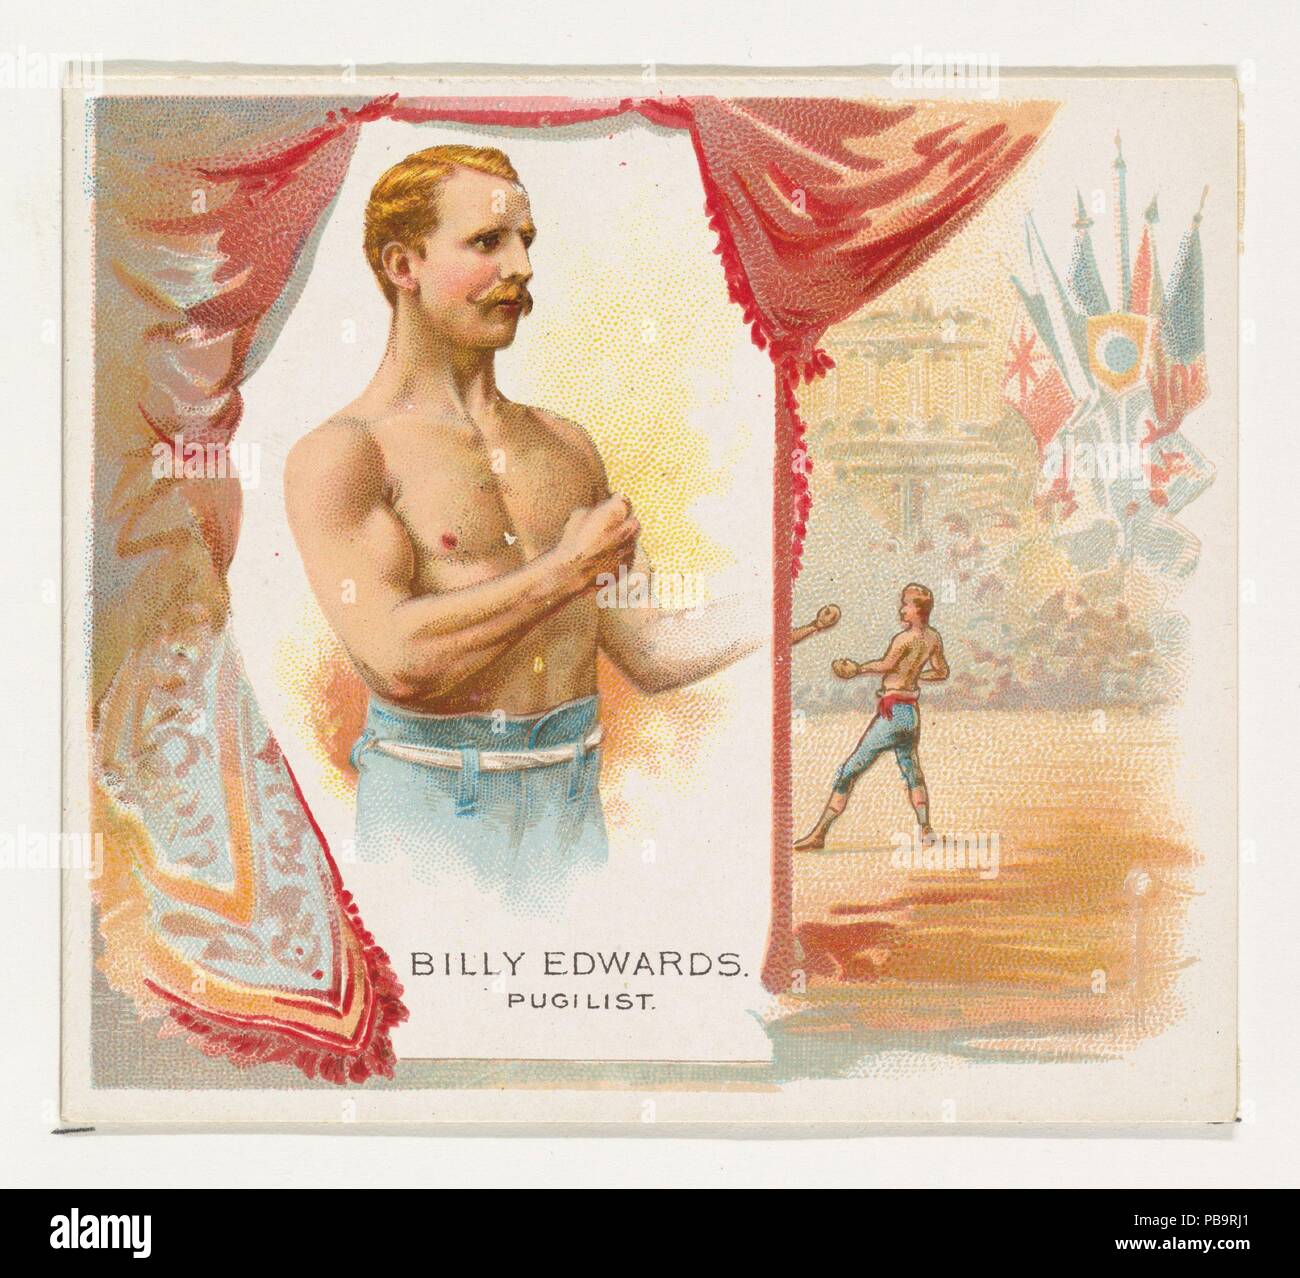 Billy Edwards, Pugilist, from World's Champions, Second Series (N43) for Allen & Ginter Cigarettes. Dimensions: Sheet: 2 15/16 x 3 1/4 in. (7.4 x 8.3 cm). Lithographer: Lindner, Eddy & Claus (American, New York). Publisher: Allen & Ginter (American, Richmond, Virginia). Date: 1888.  Trade cards from "World's Champions," Second Series (N43), issued in 1888 in a set of 50 cards to promote Allen & Ginter brand cigarettes. Museum: Metropolitan Museum of Art, New York, USA. Stock Photo